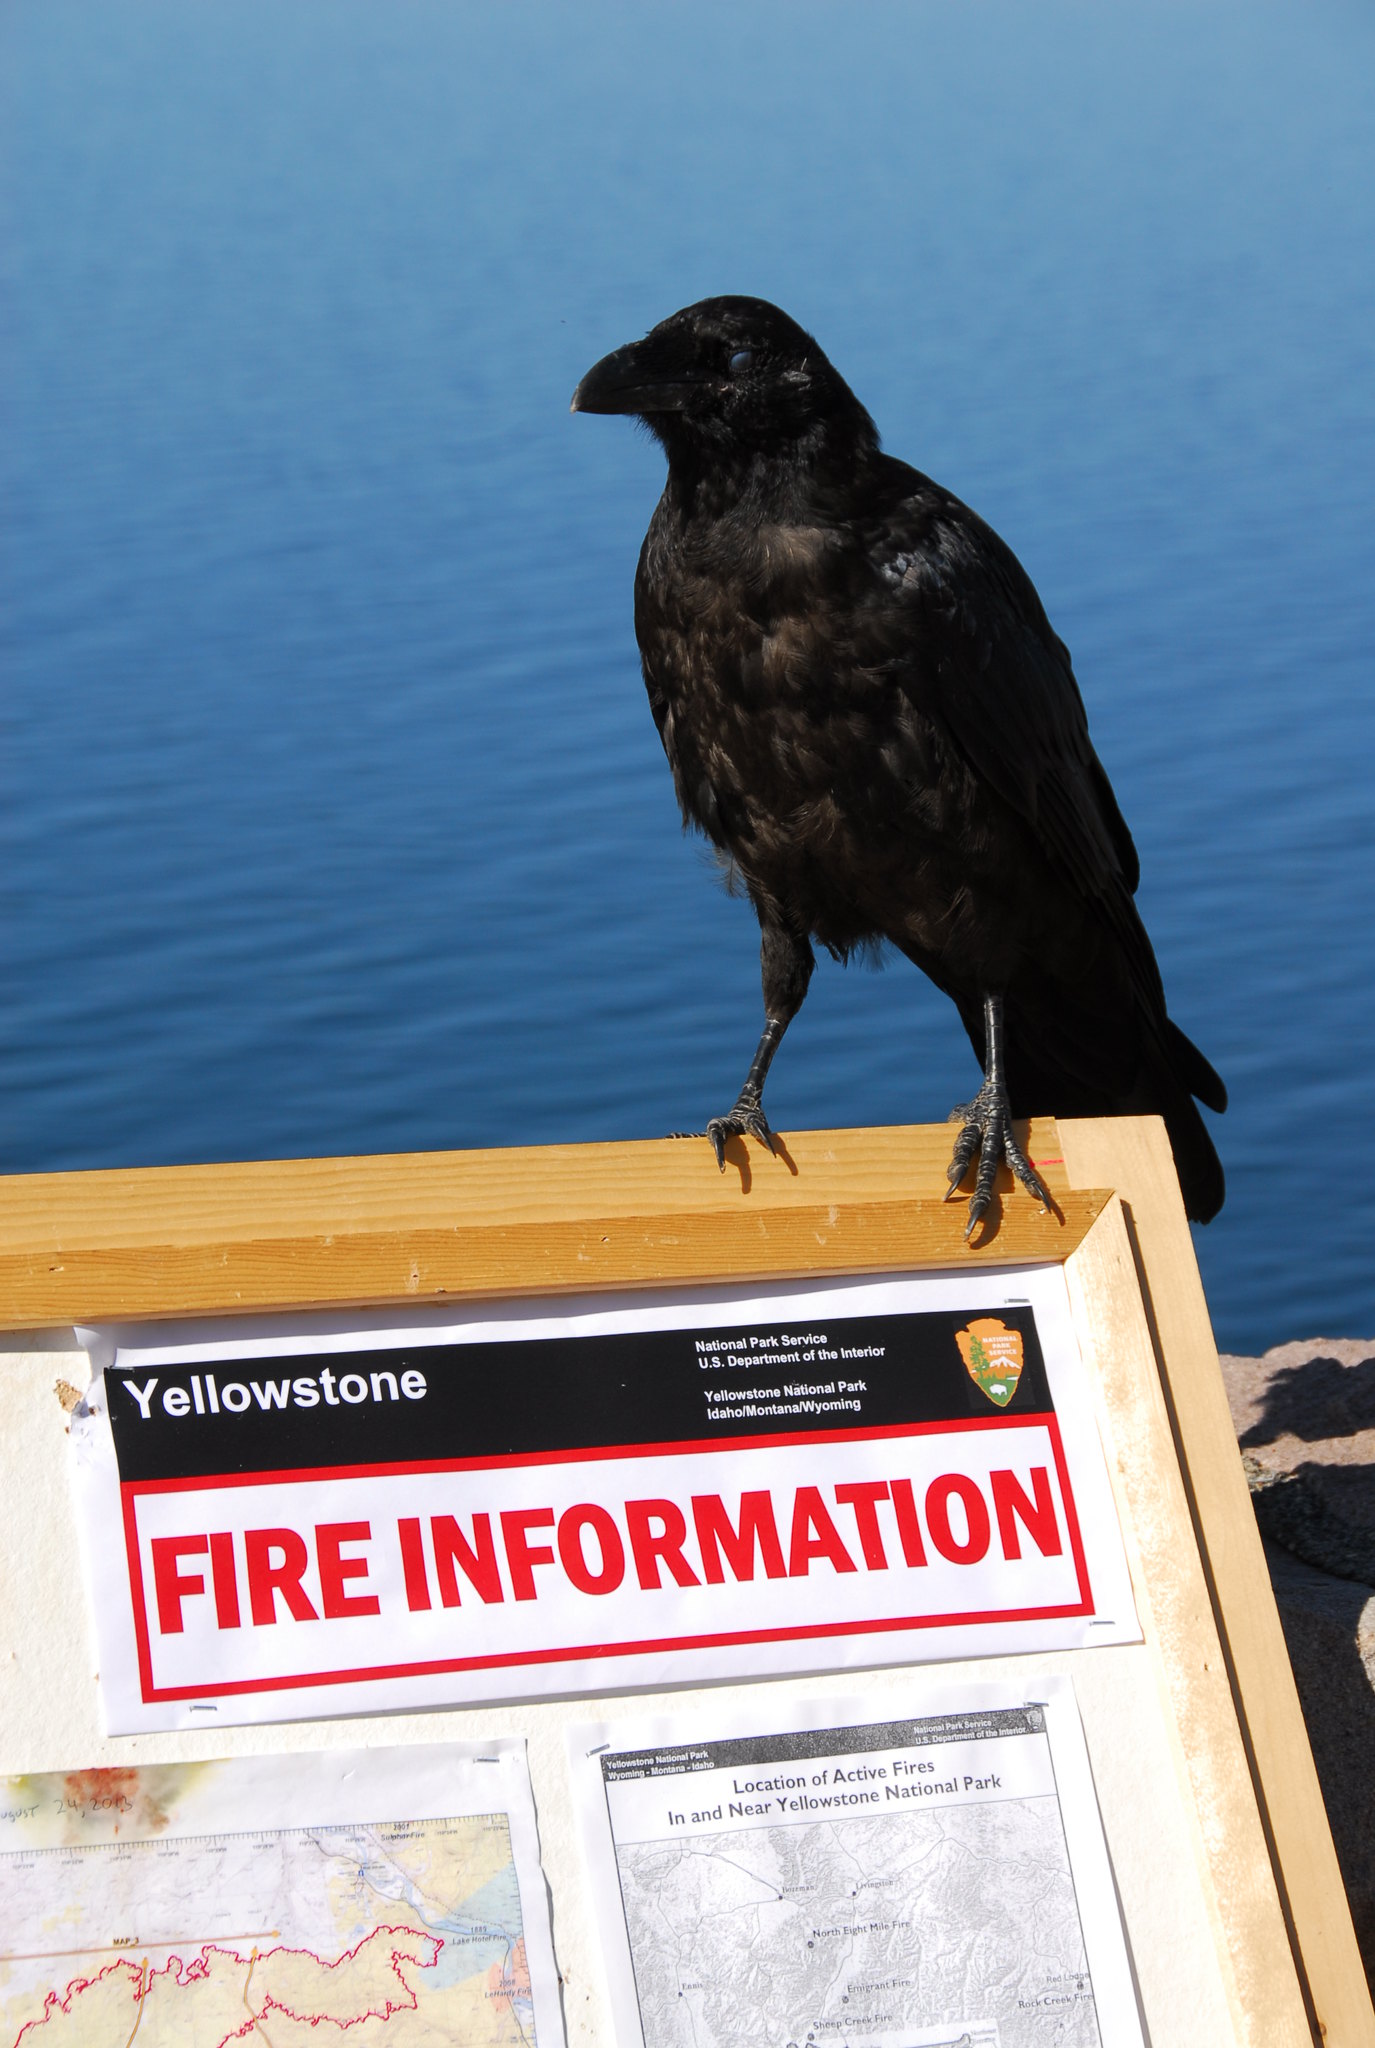 raven standing on a billboard with sign that says fire information